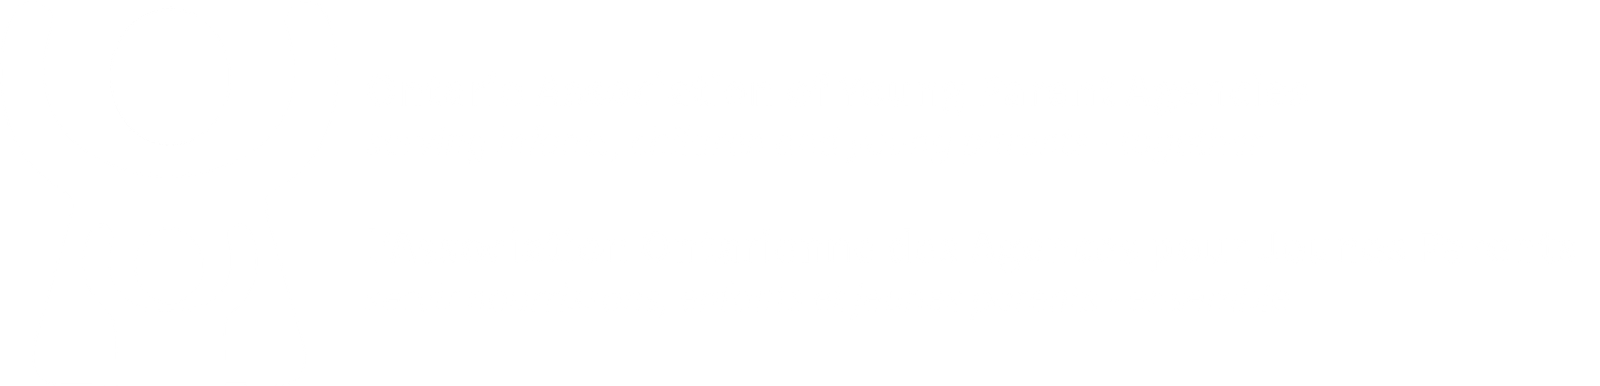 Ontario Association of Young Parent Agencies Logo click to go to home page